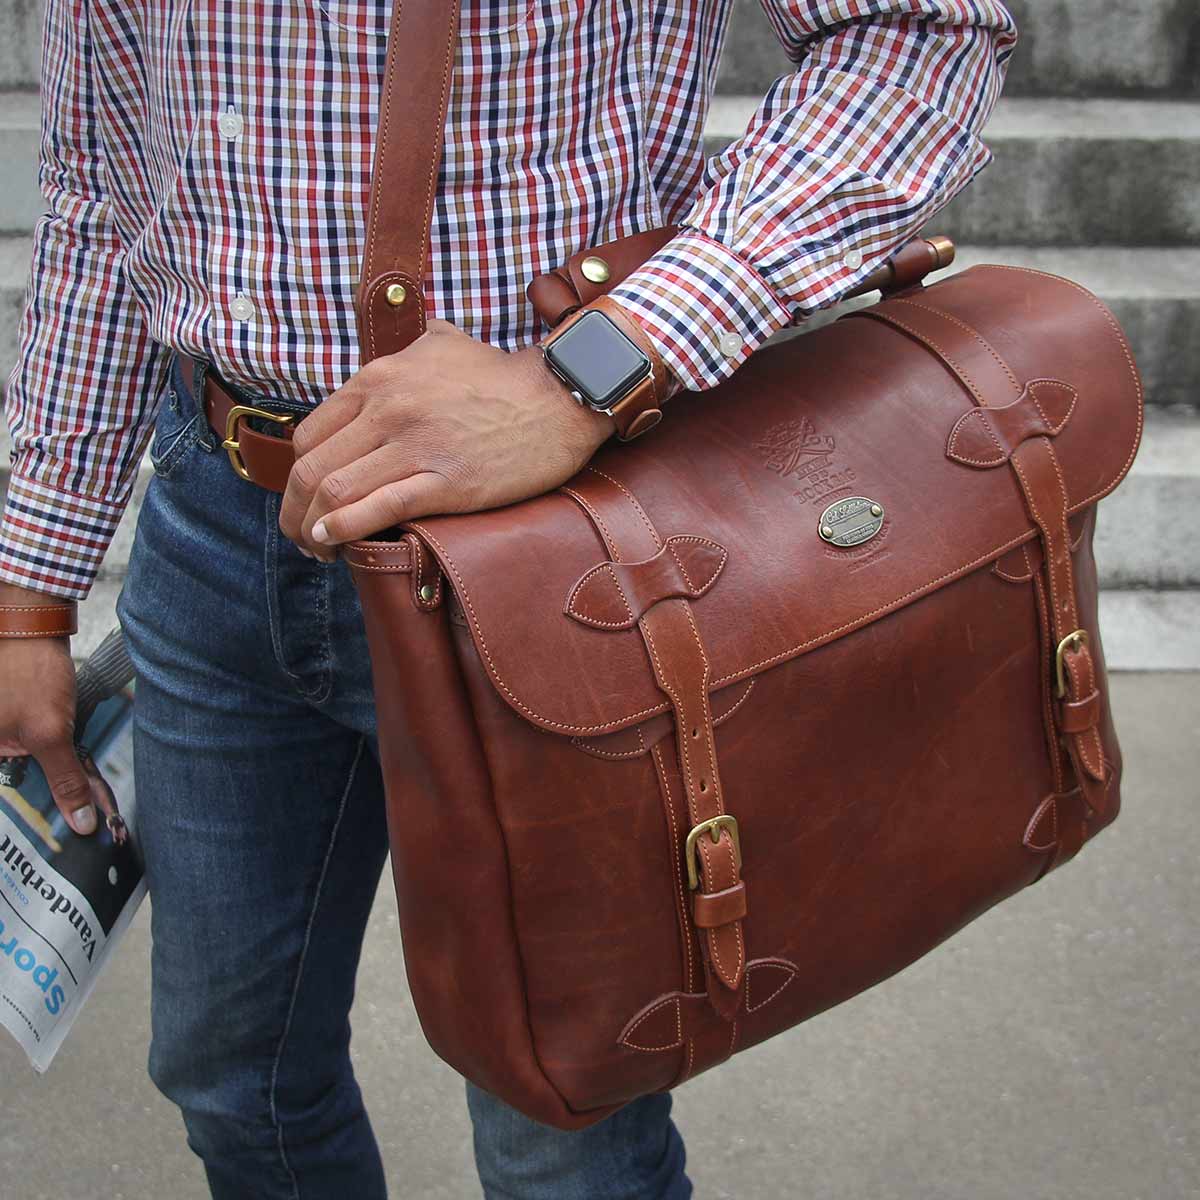 Brown Leather Messenger Bag with Overcoat Outfits (12 ideas & outfits)